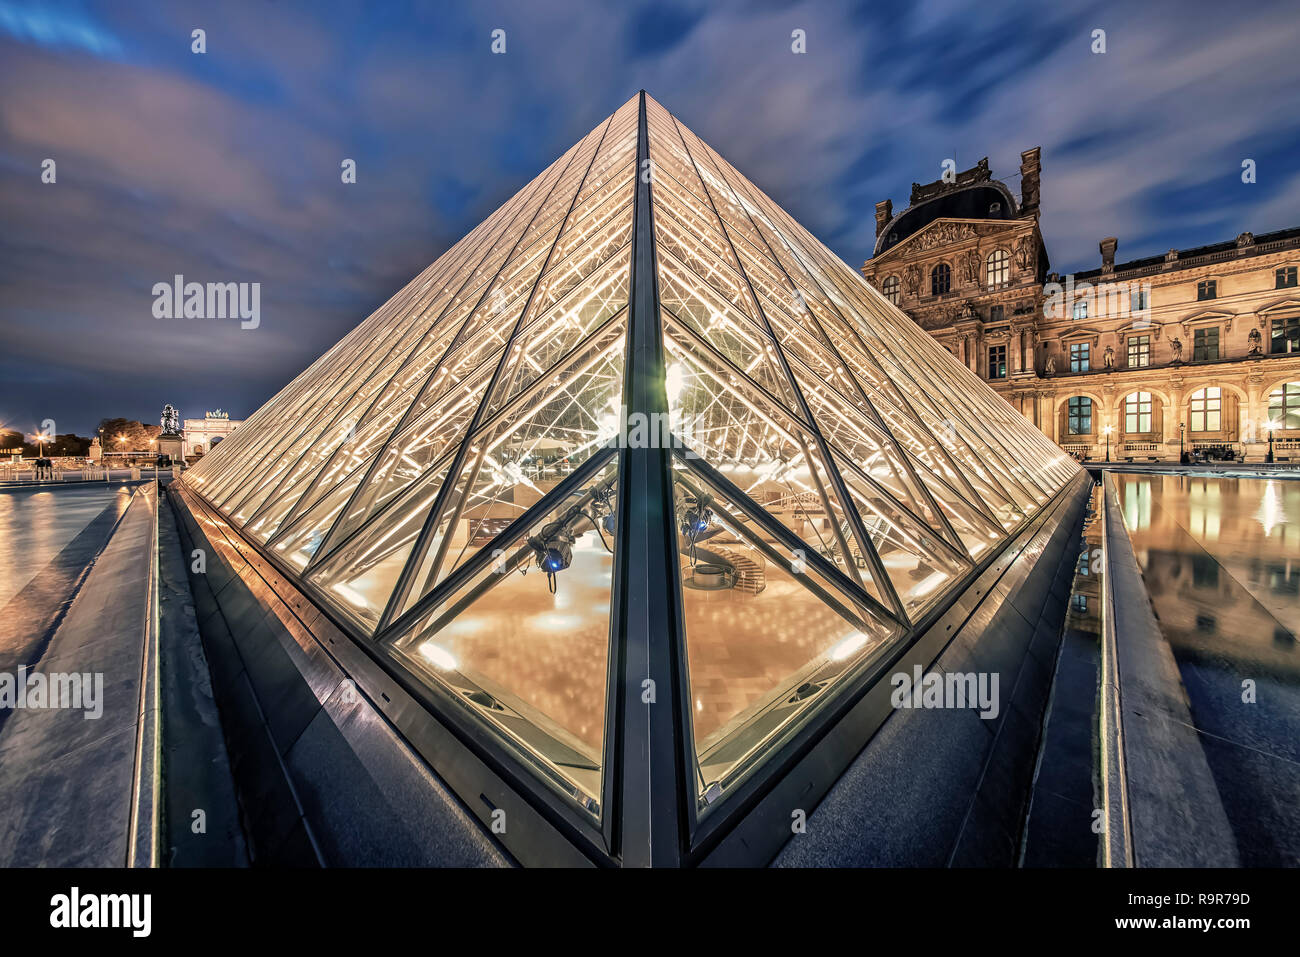 Le Louvre museum in evening Stock Photo